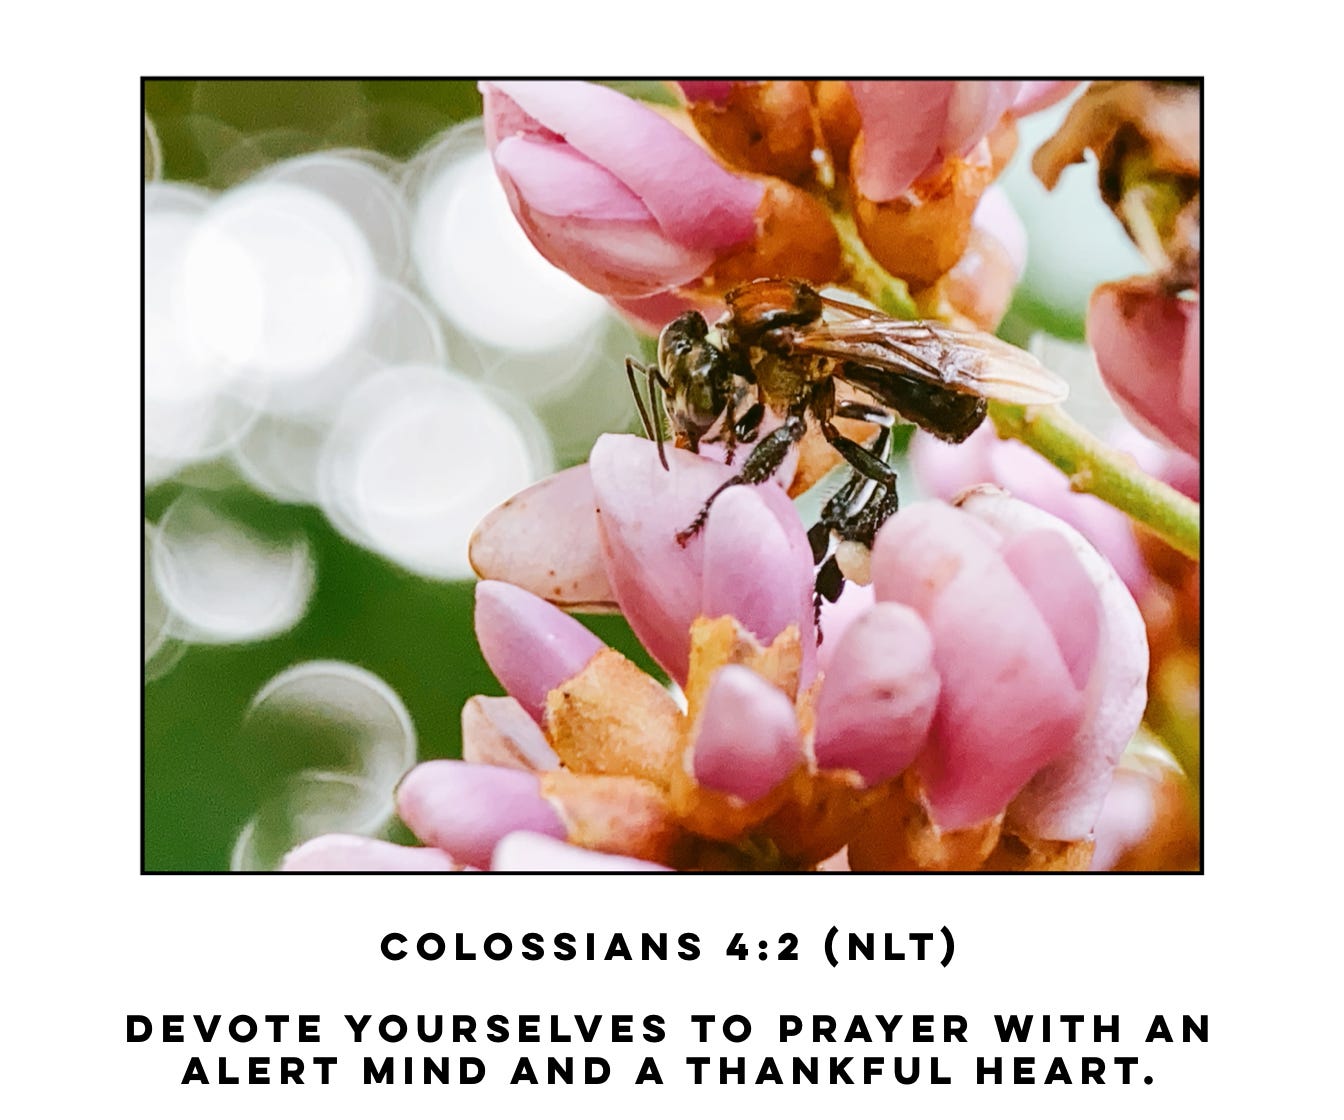 Close up of a bee on a pink flower. Bible verse Colossians 4:2 NLT Devote yourselves to prayer with an alert mind and a thankful heart.